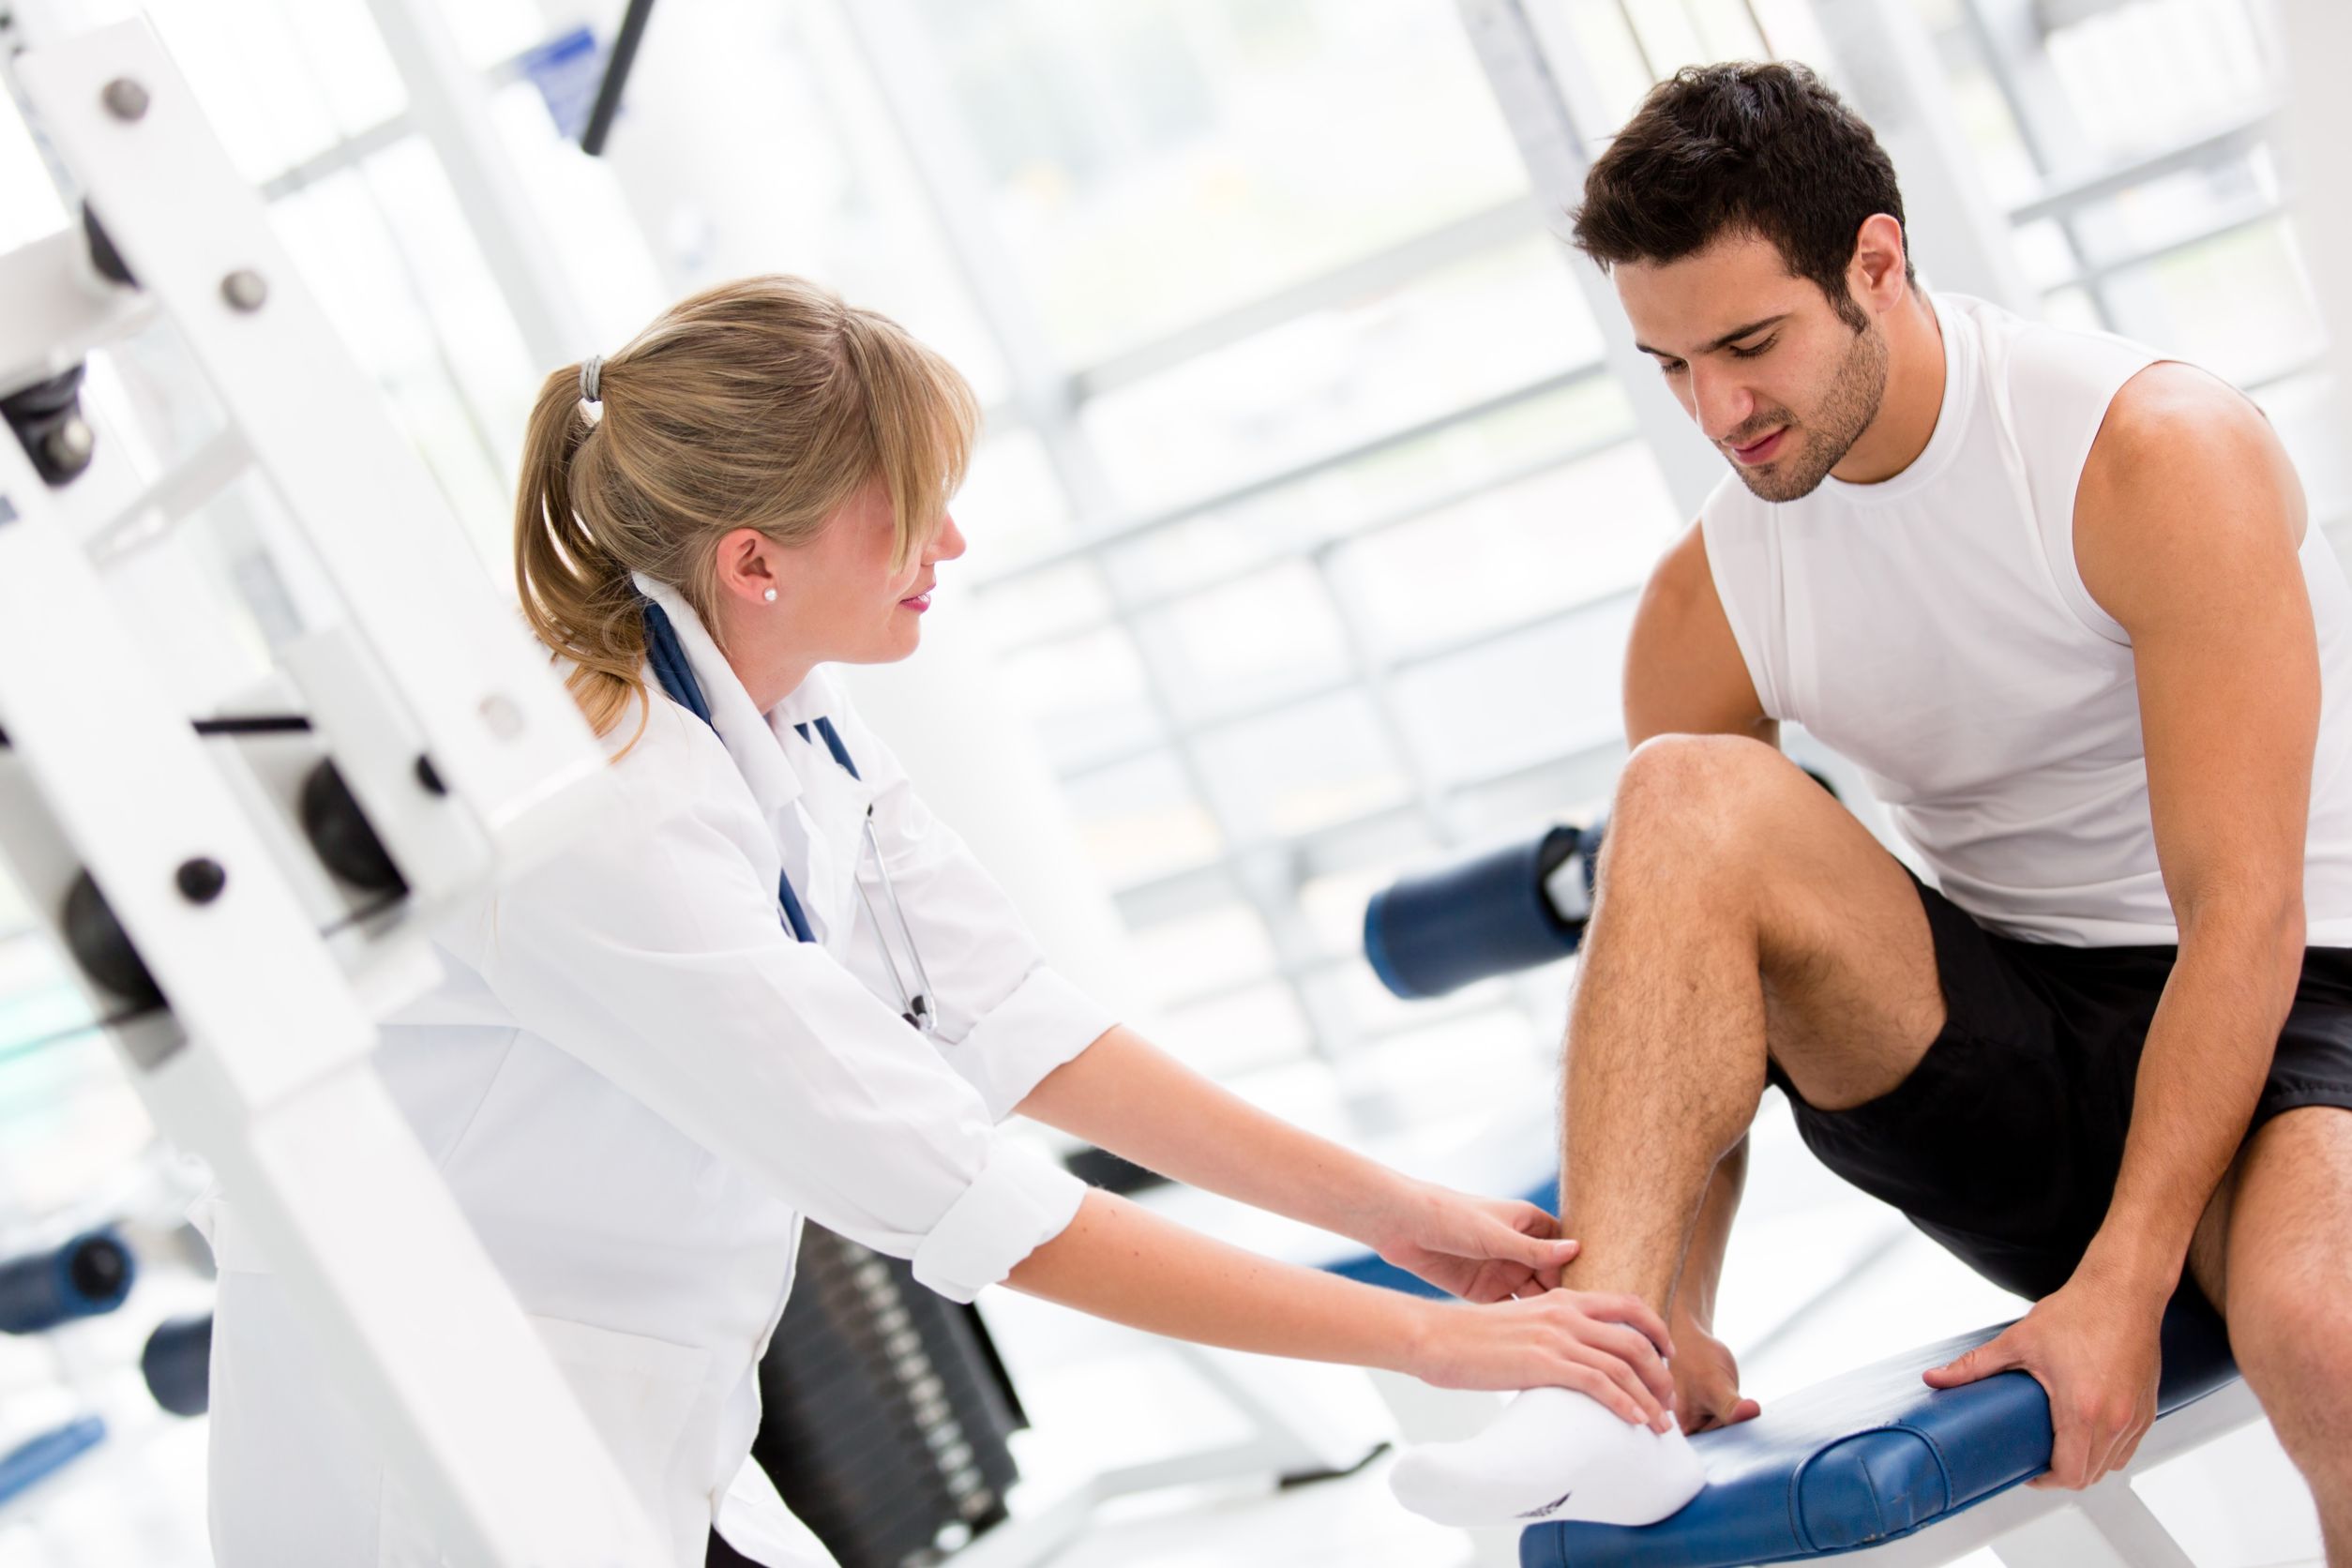 What Is Achilles Tendinitis and How Is It Treated?